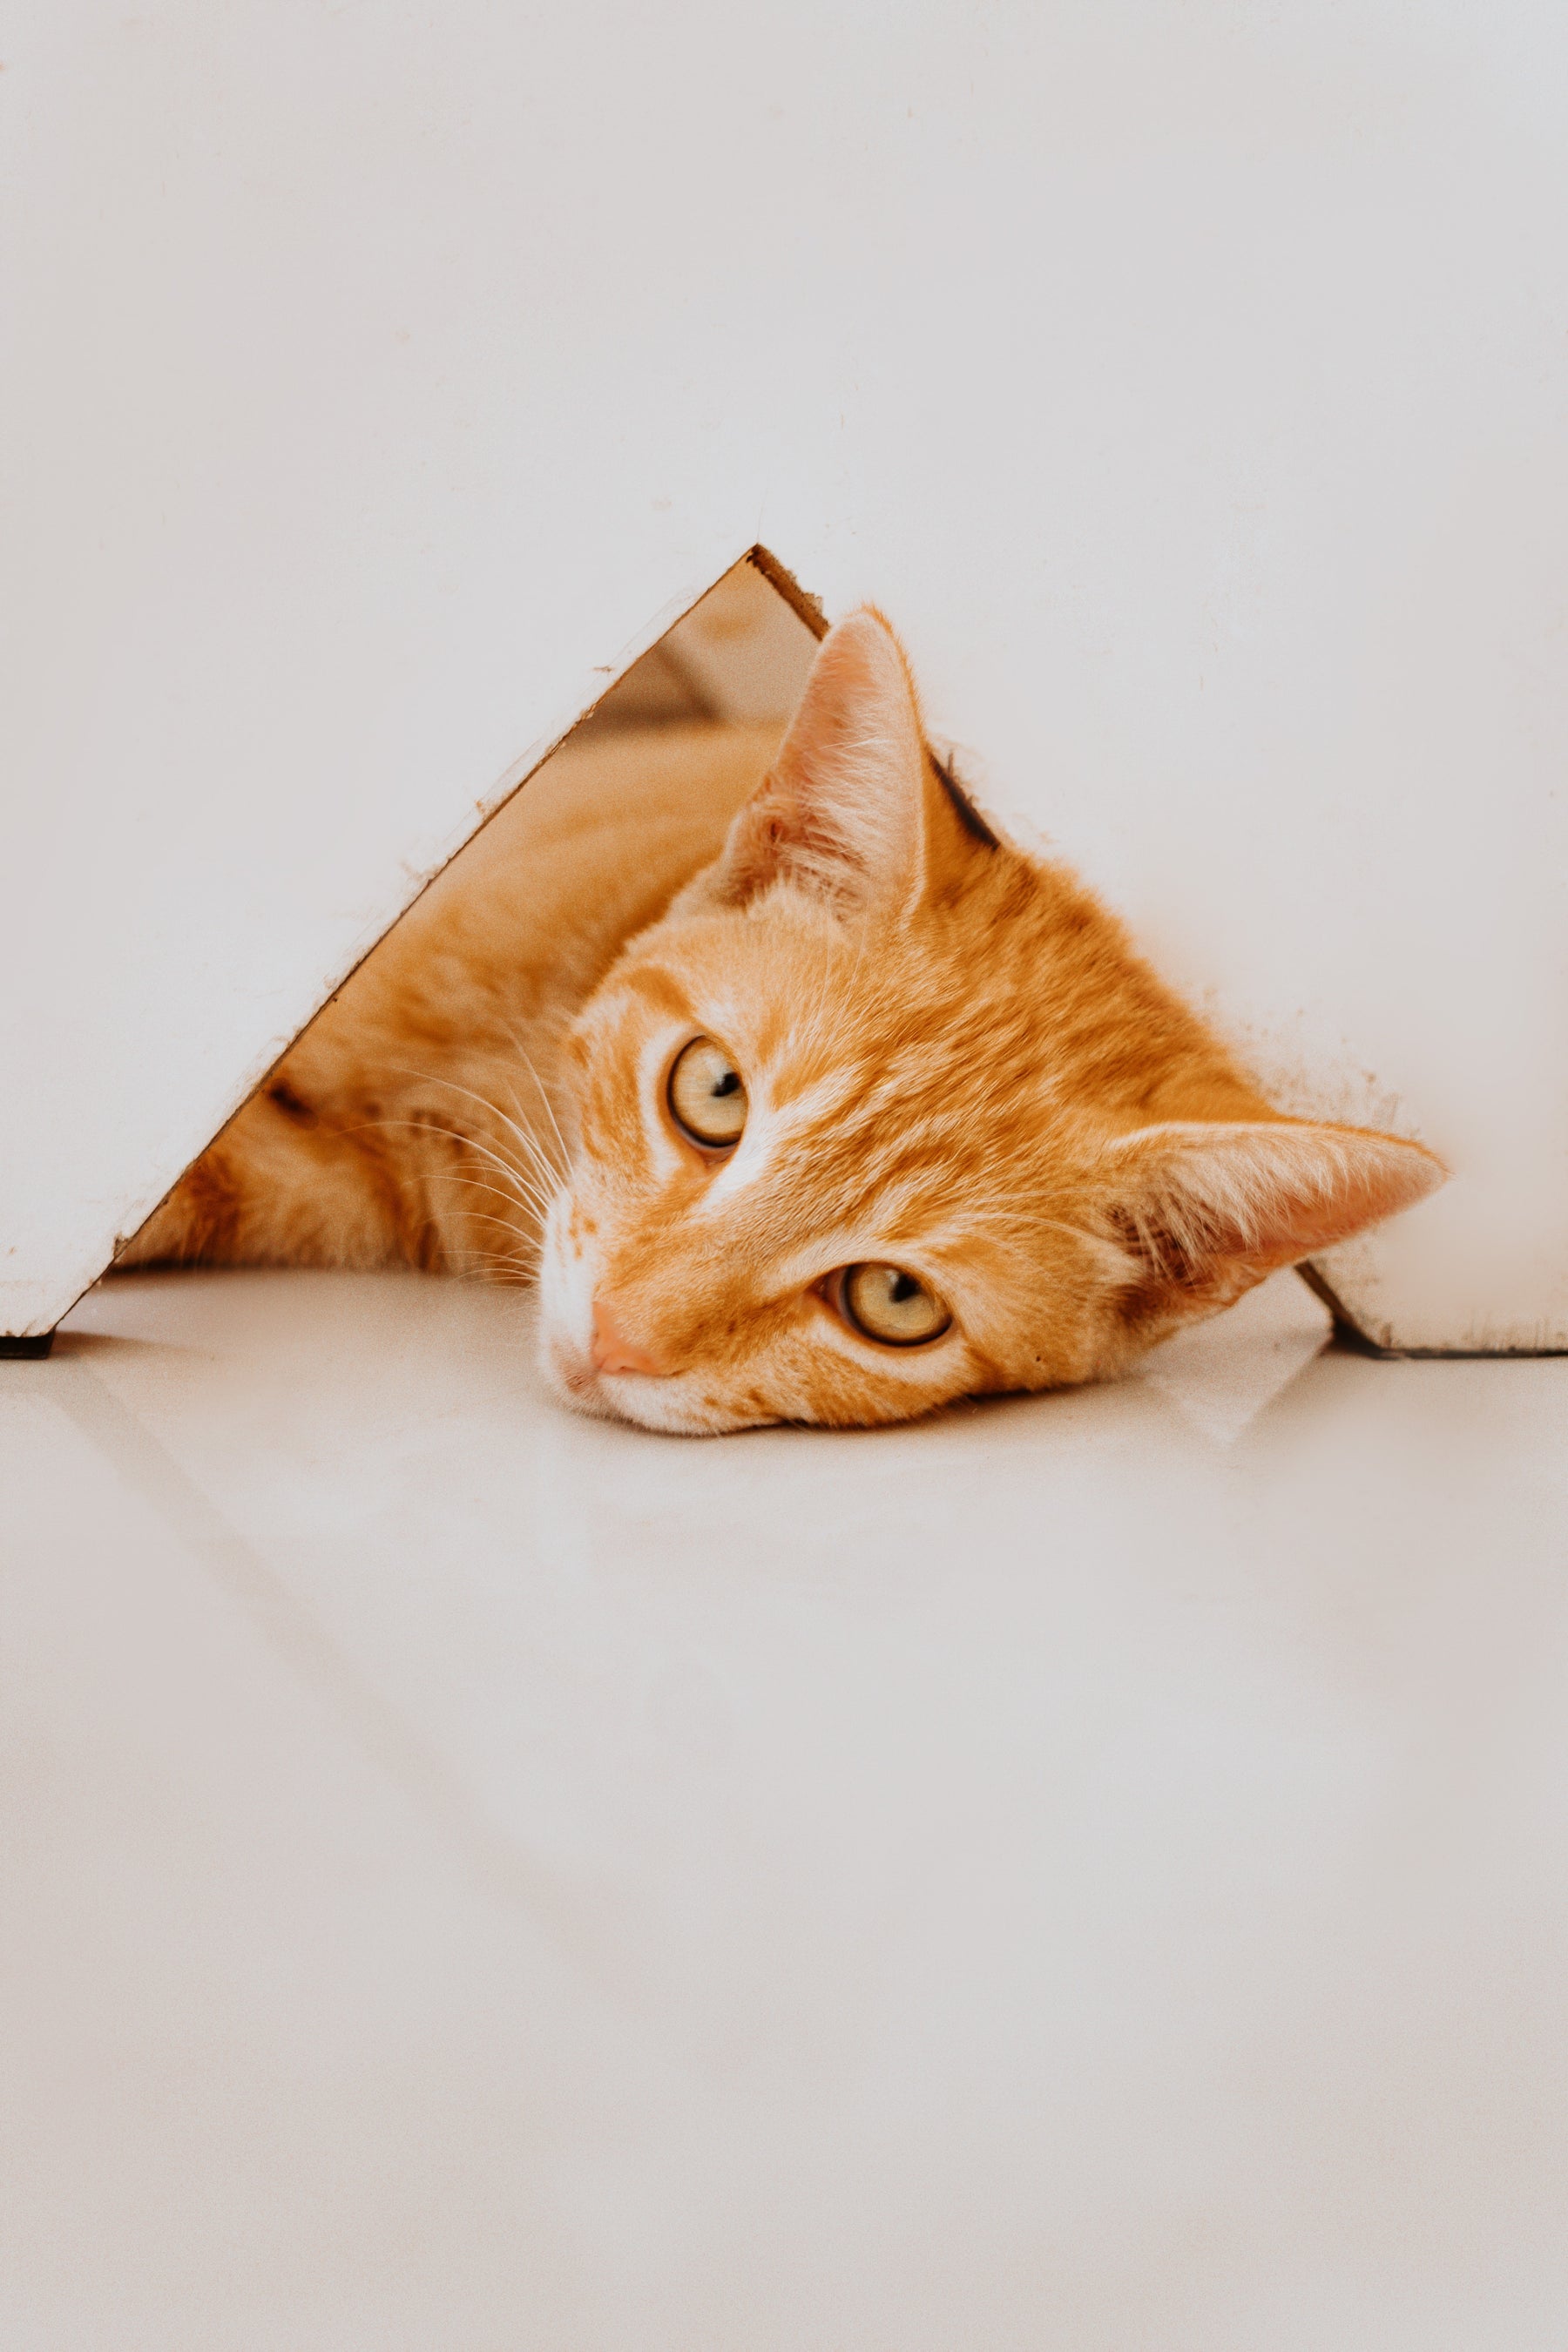 Ginger cat laying prone on white floor through triangular hole looking directly at camera